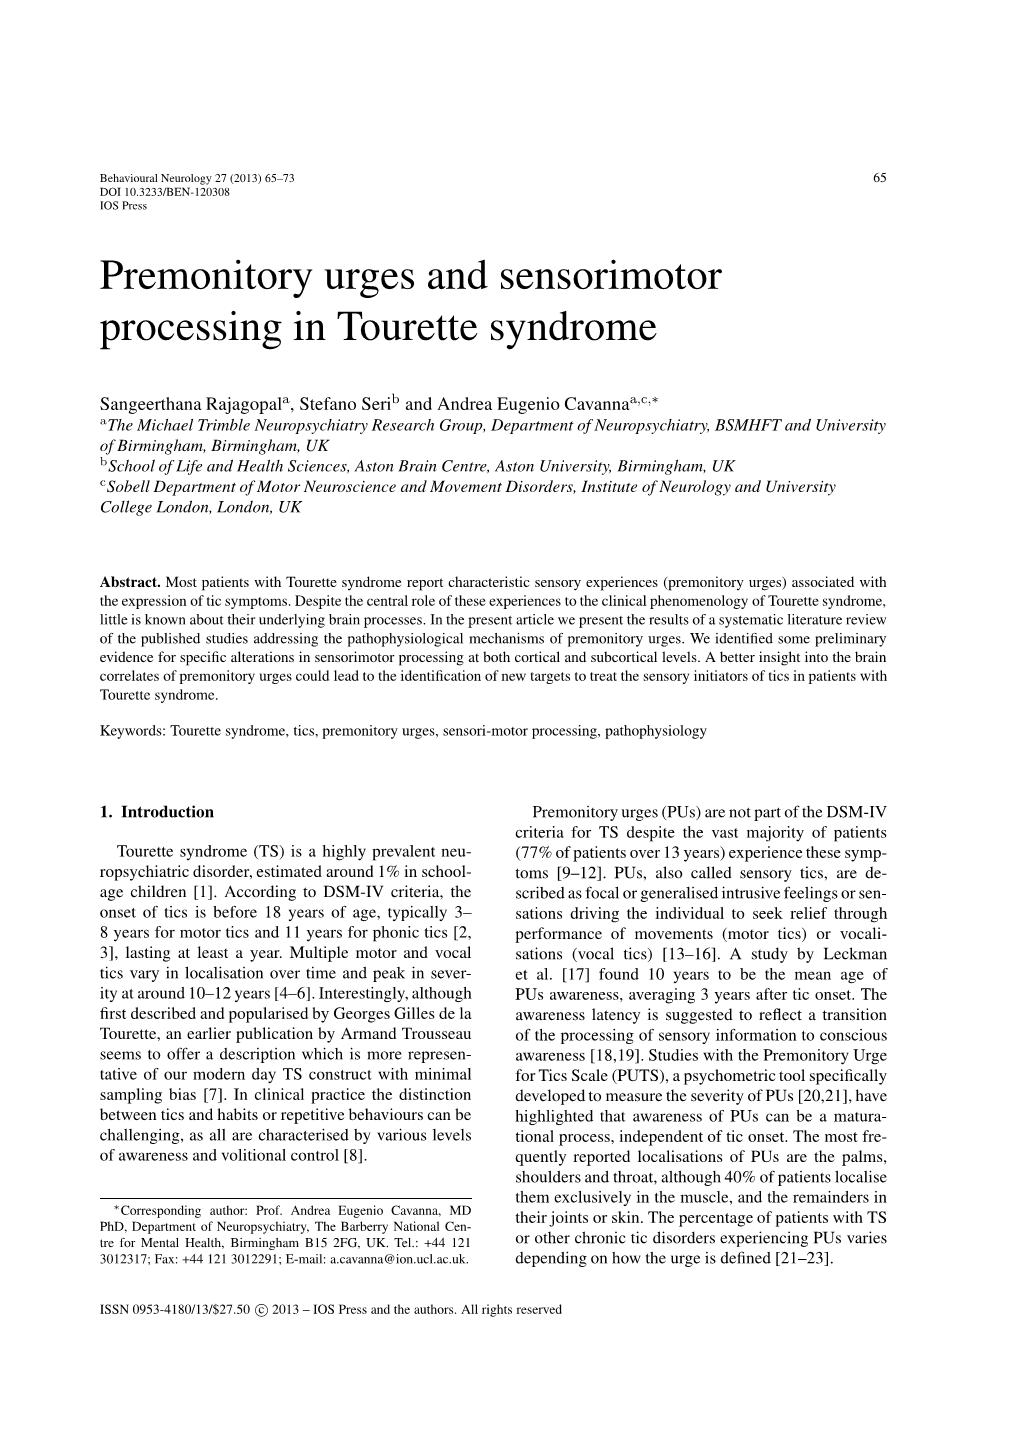 Premonitory Urges and Sensorimotor Processing in Tourette Syndrome